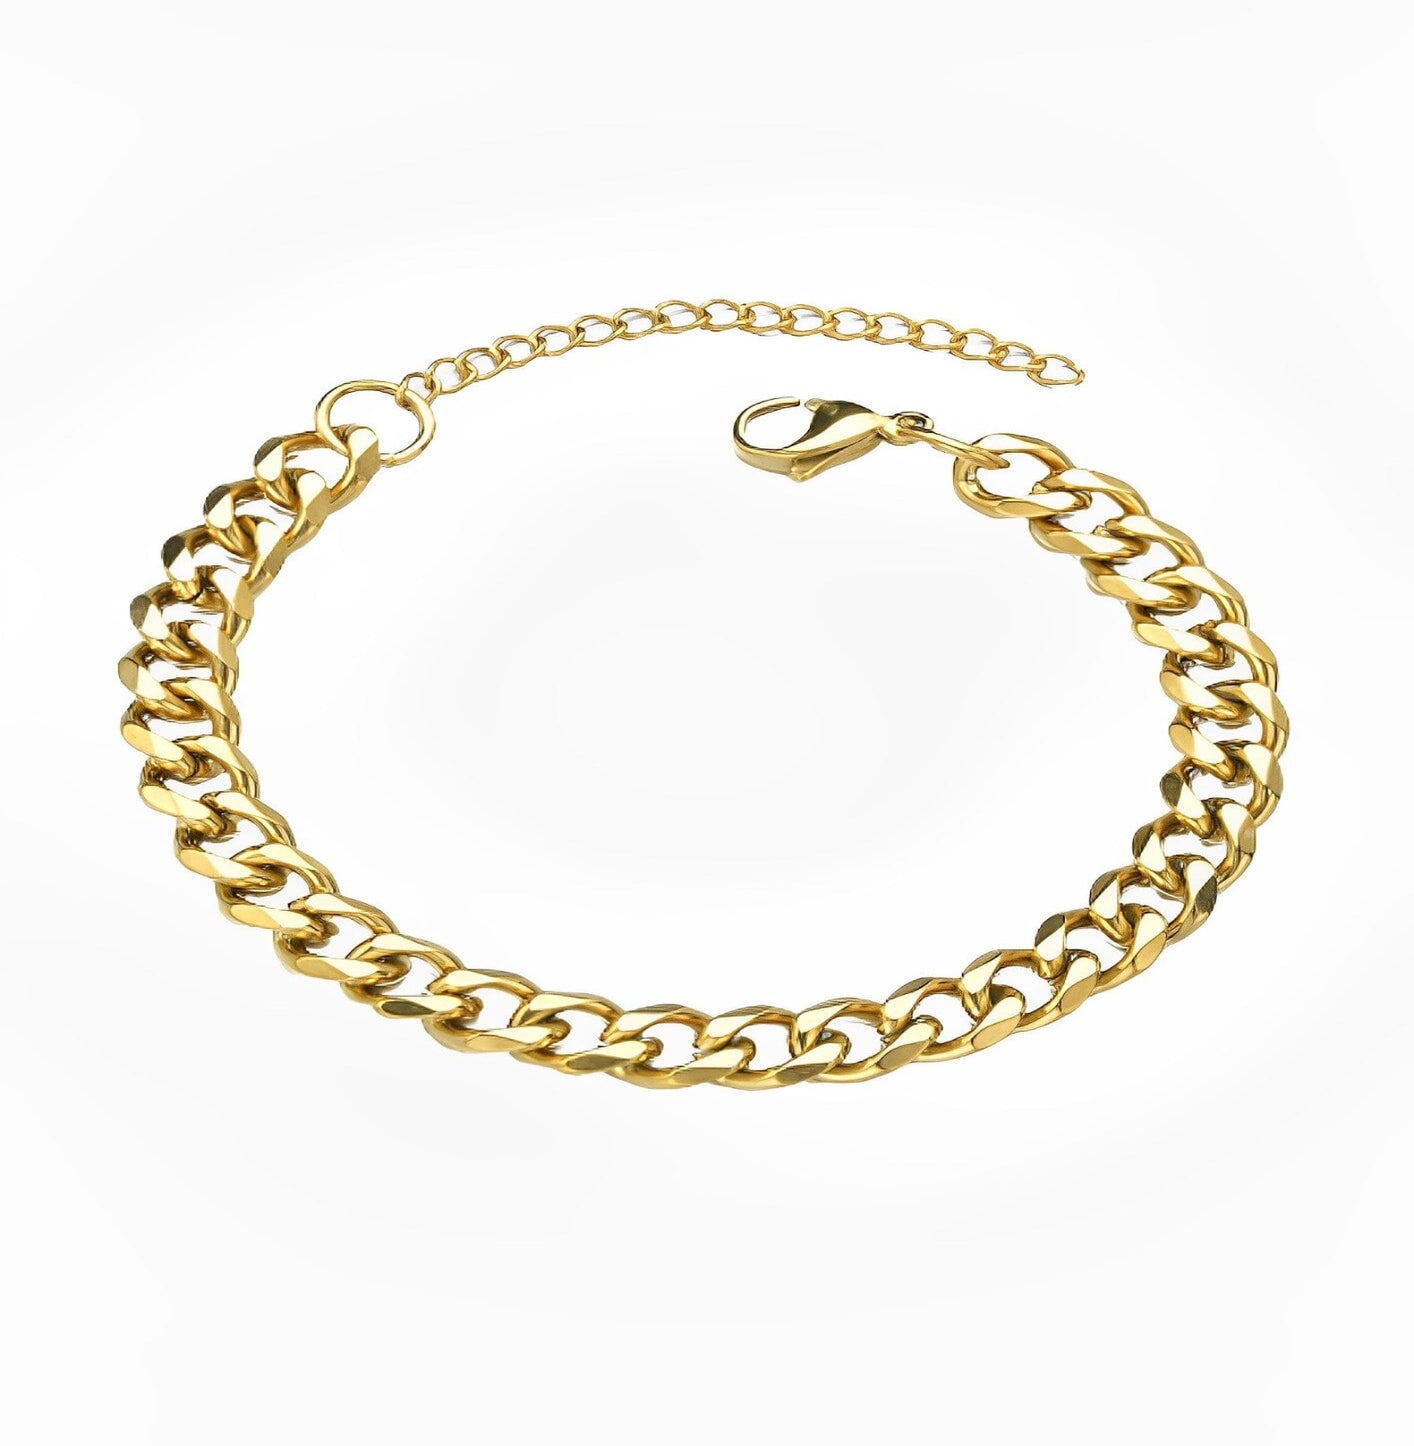 CUBAN BRACELET braclet Yubama Jewelry Online Store - The Elegant Designs of Gold and Silver ! 